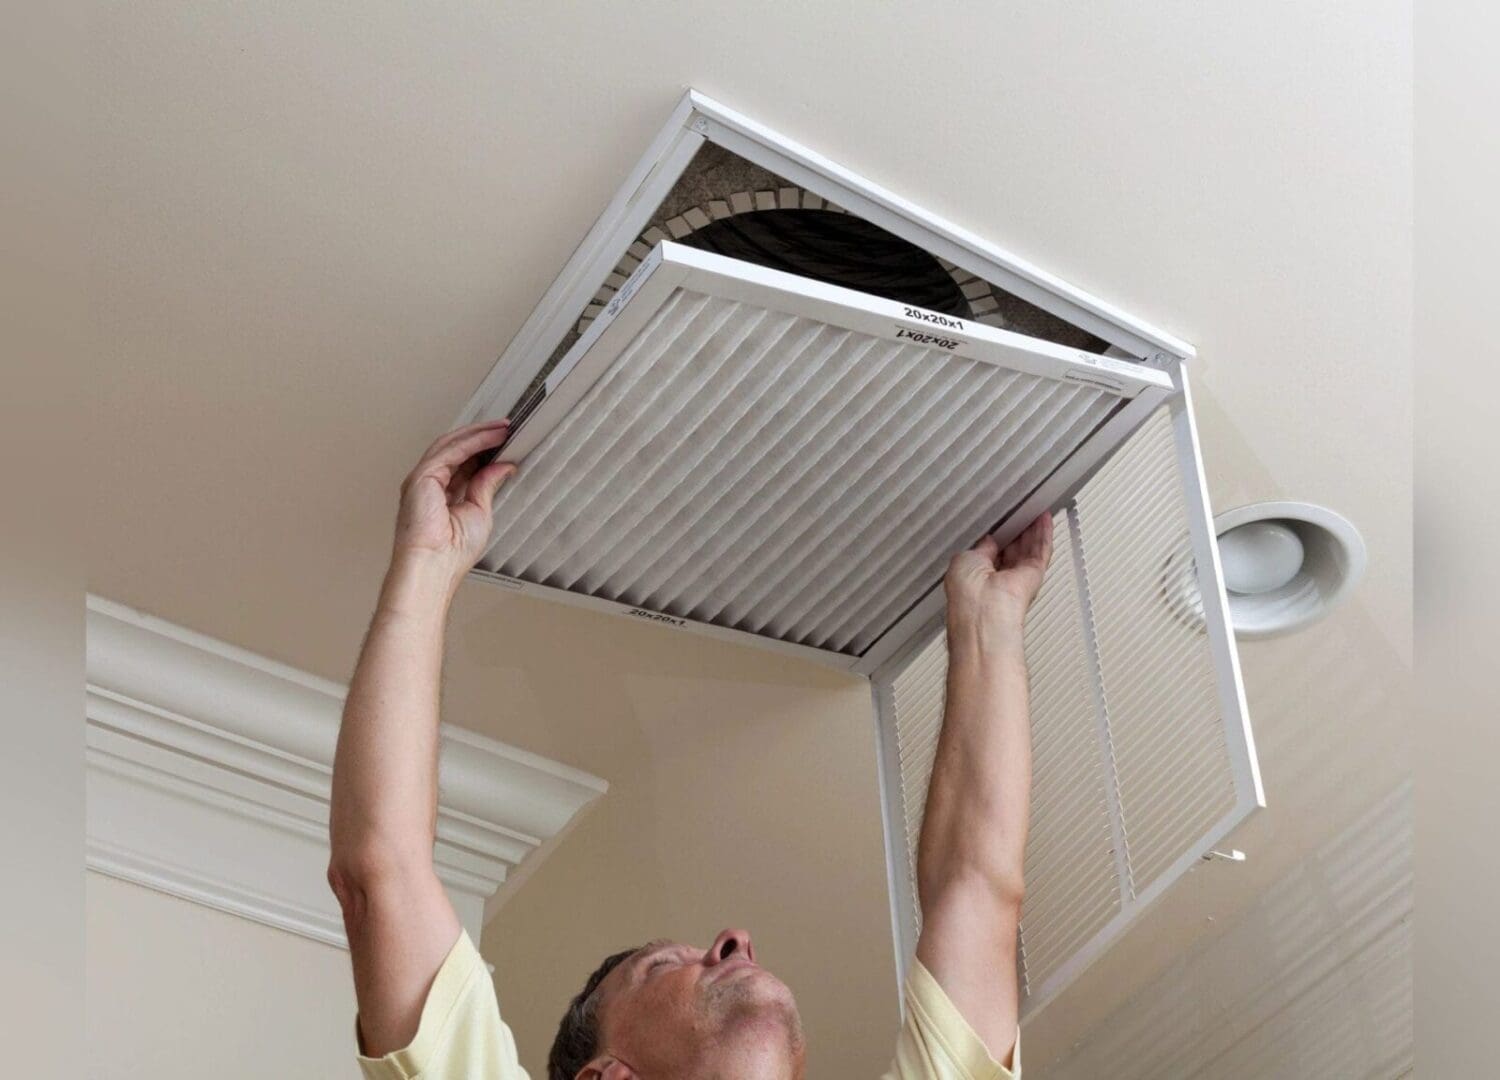 A man performing a DIY installation of an air conditioner in a room.